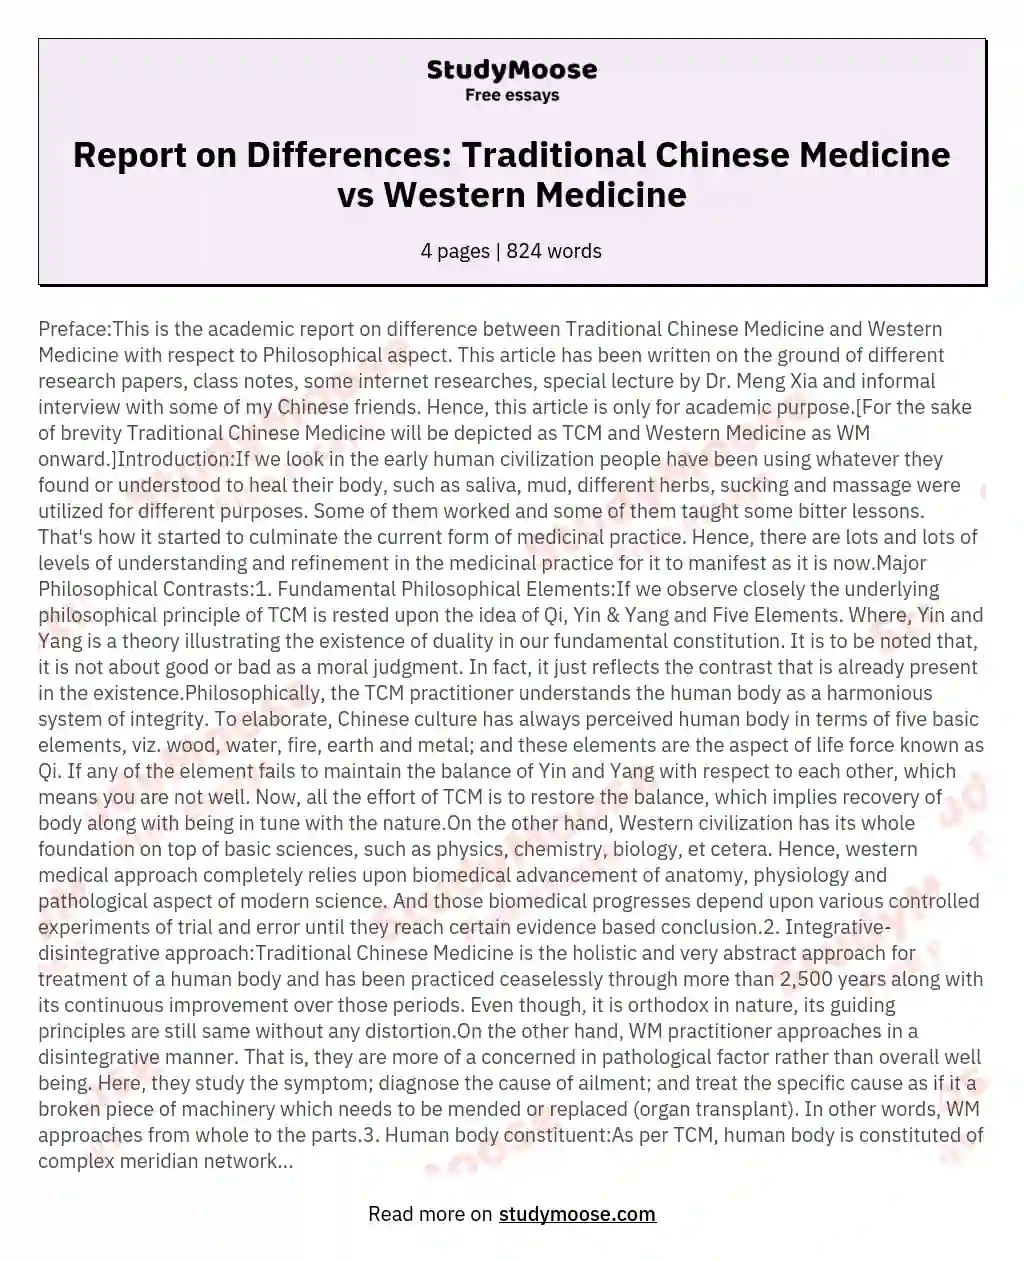 Report on Differences: Traditional Chinese Medicine vs Western Medicine